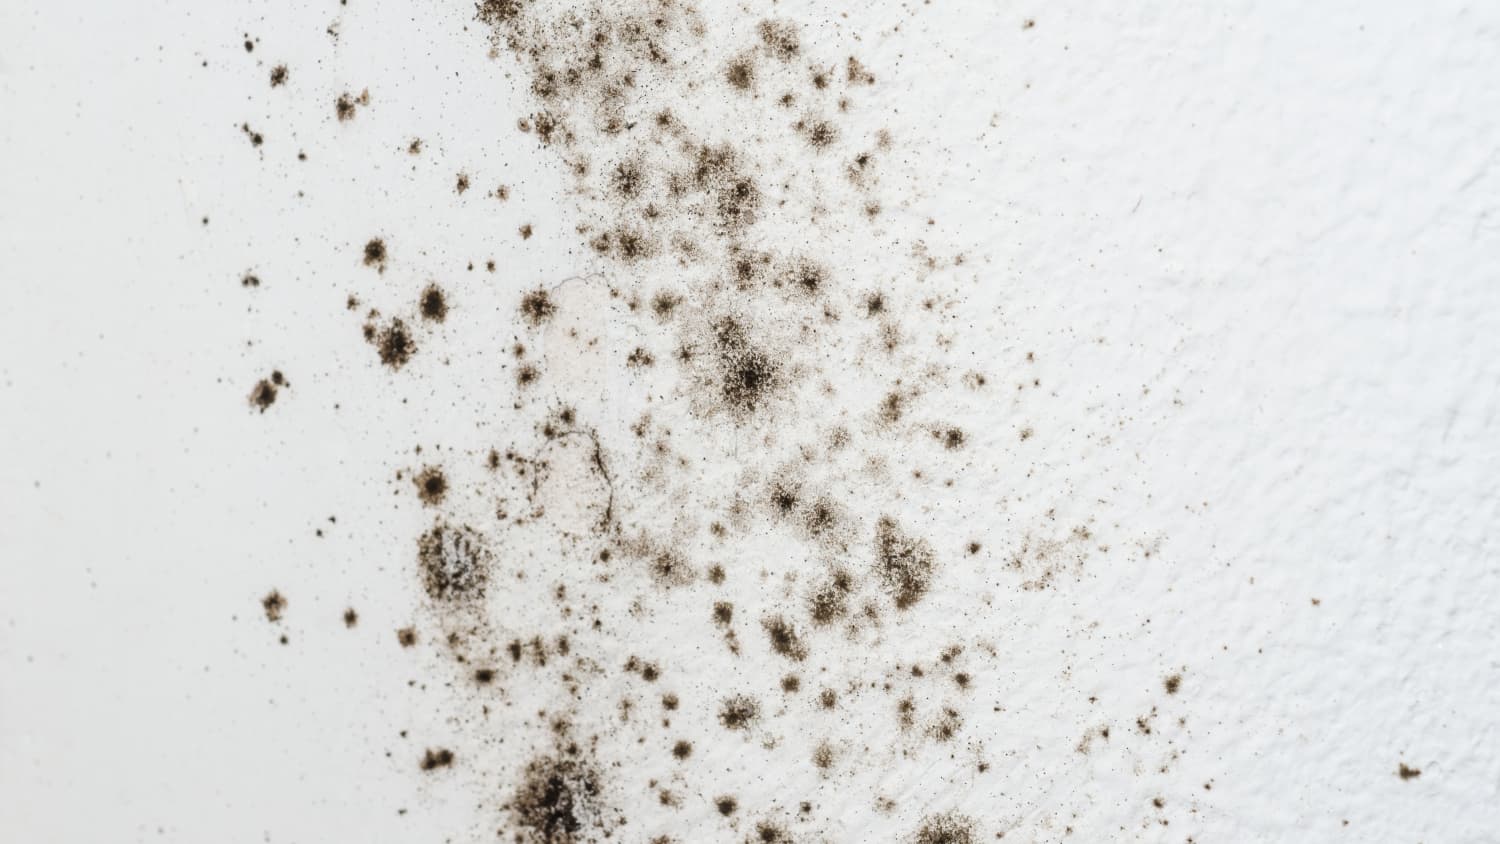 Black Mold Symptoms - How To Get Rid Of Black Mold